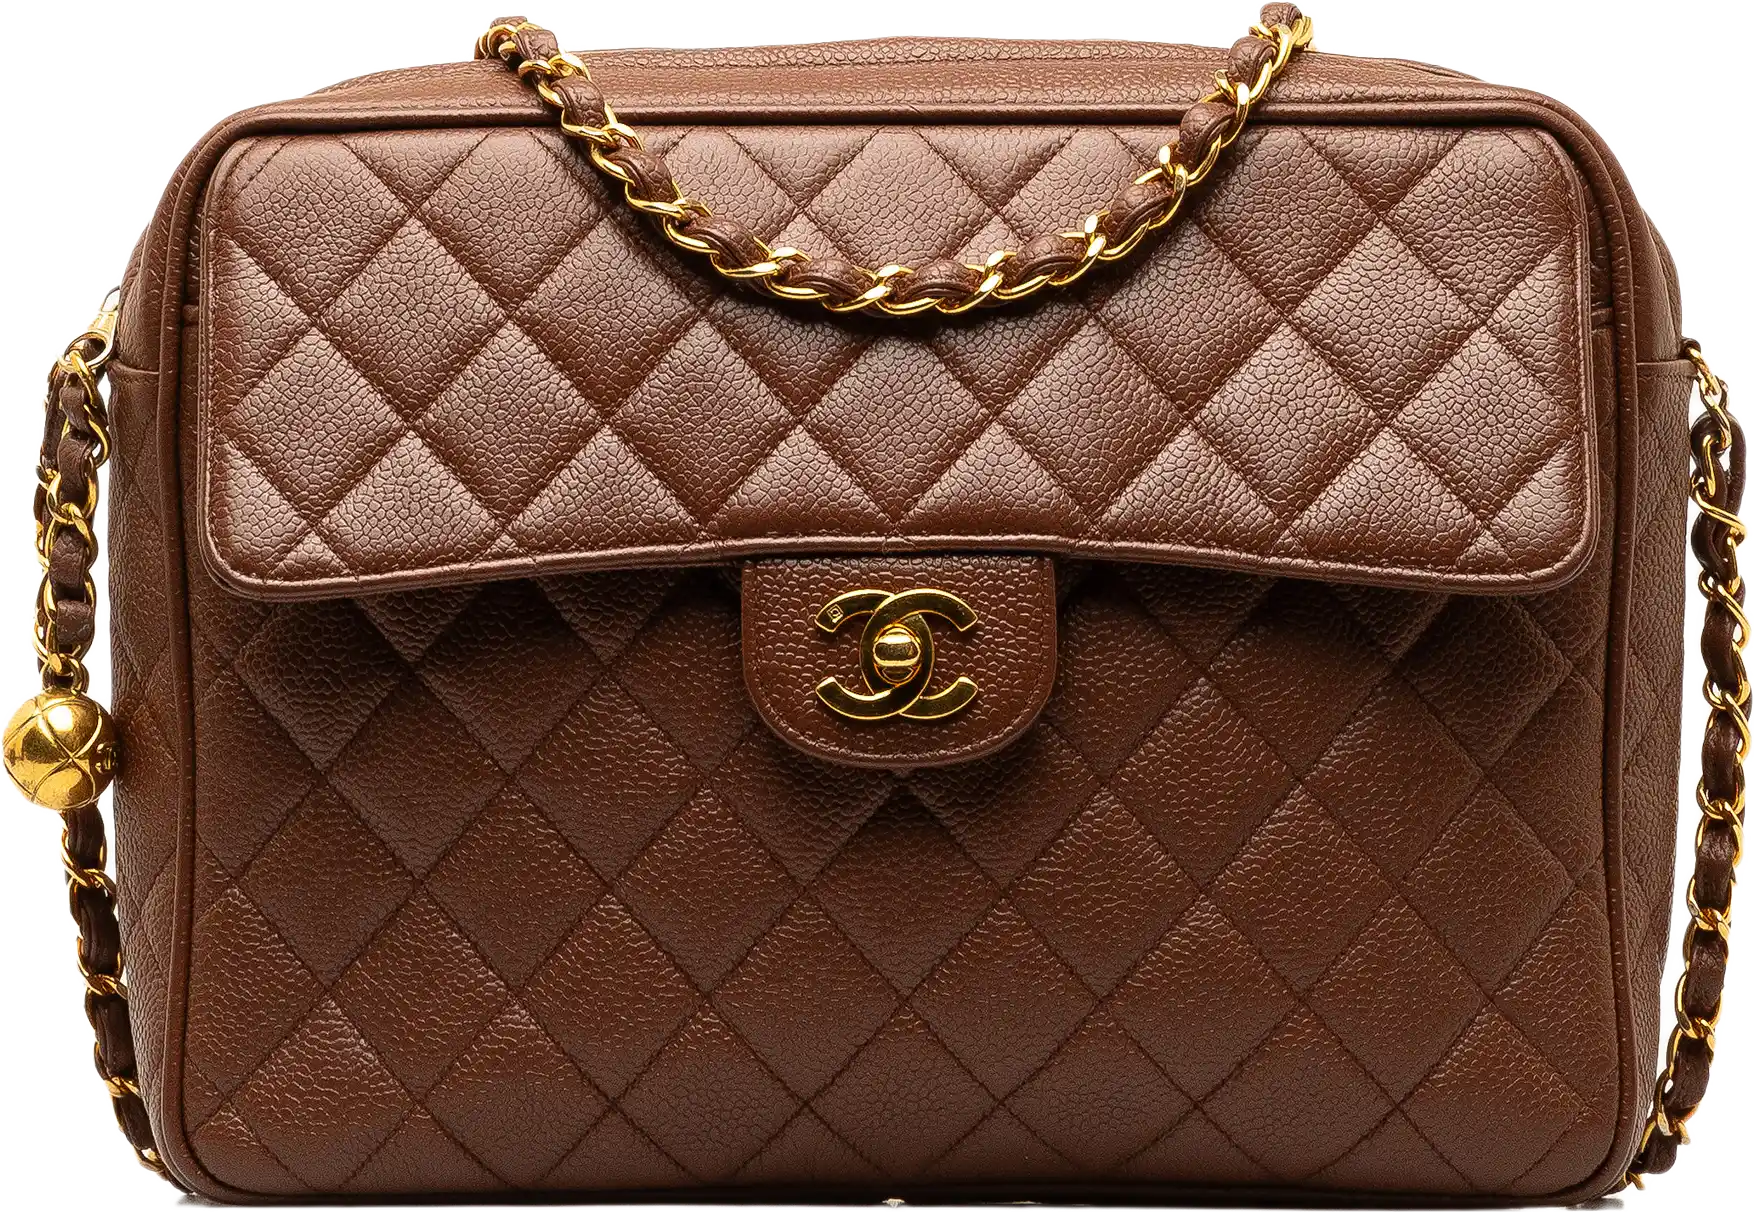 Chanel Cc Quilted Caviar Flap